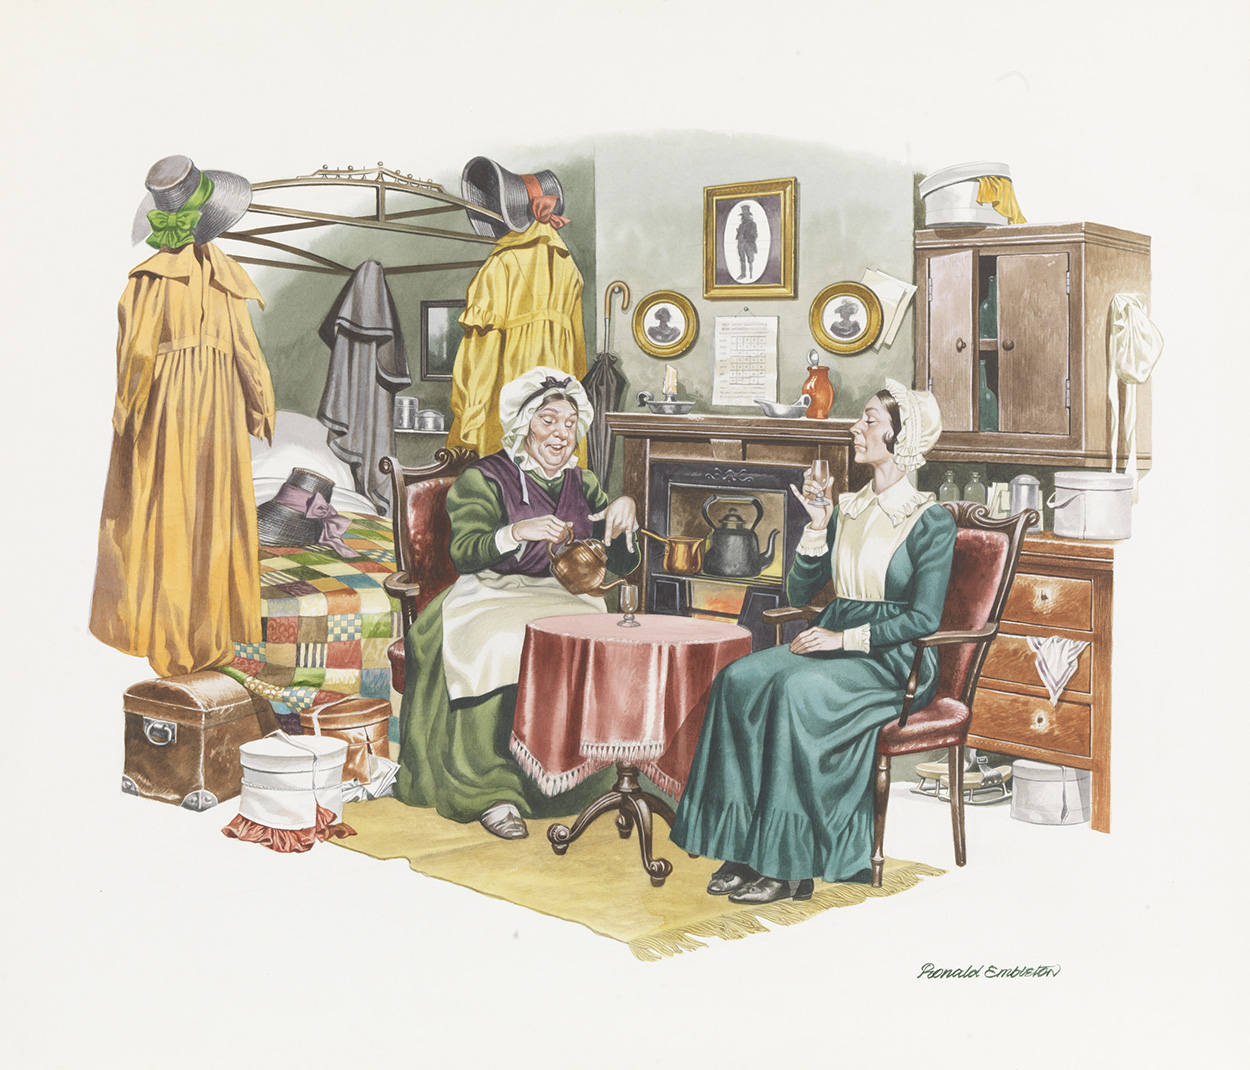 Martin Chuzzlewit - Taking Tea (Original) (Signed) art by Charles Dickens (Ron Embleton) at The Illustration Art Gallery